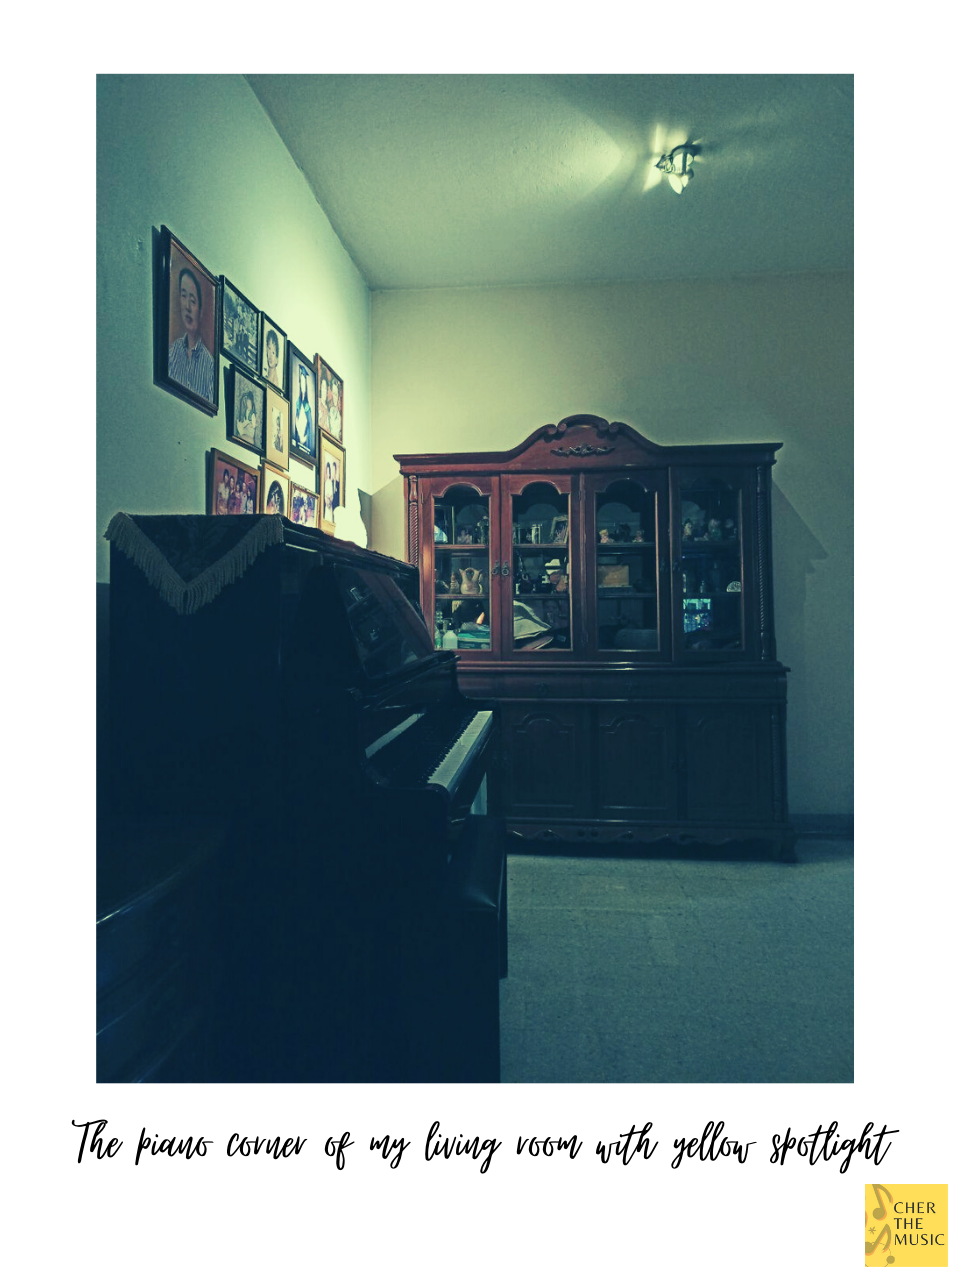 The piano corner of my living room with yellow spotlight